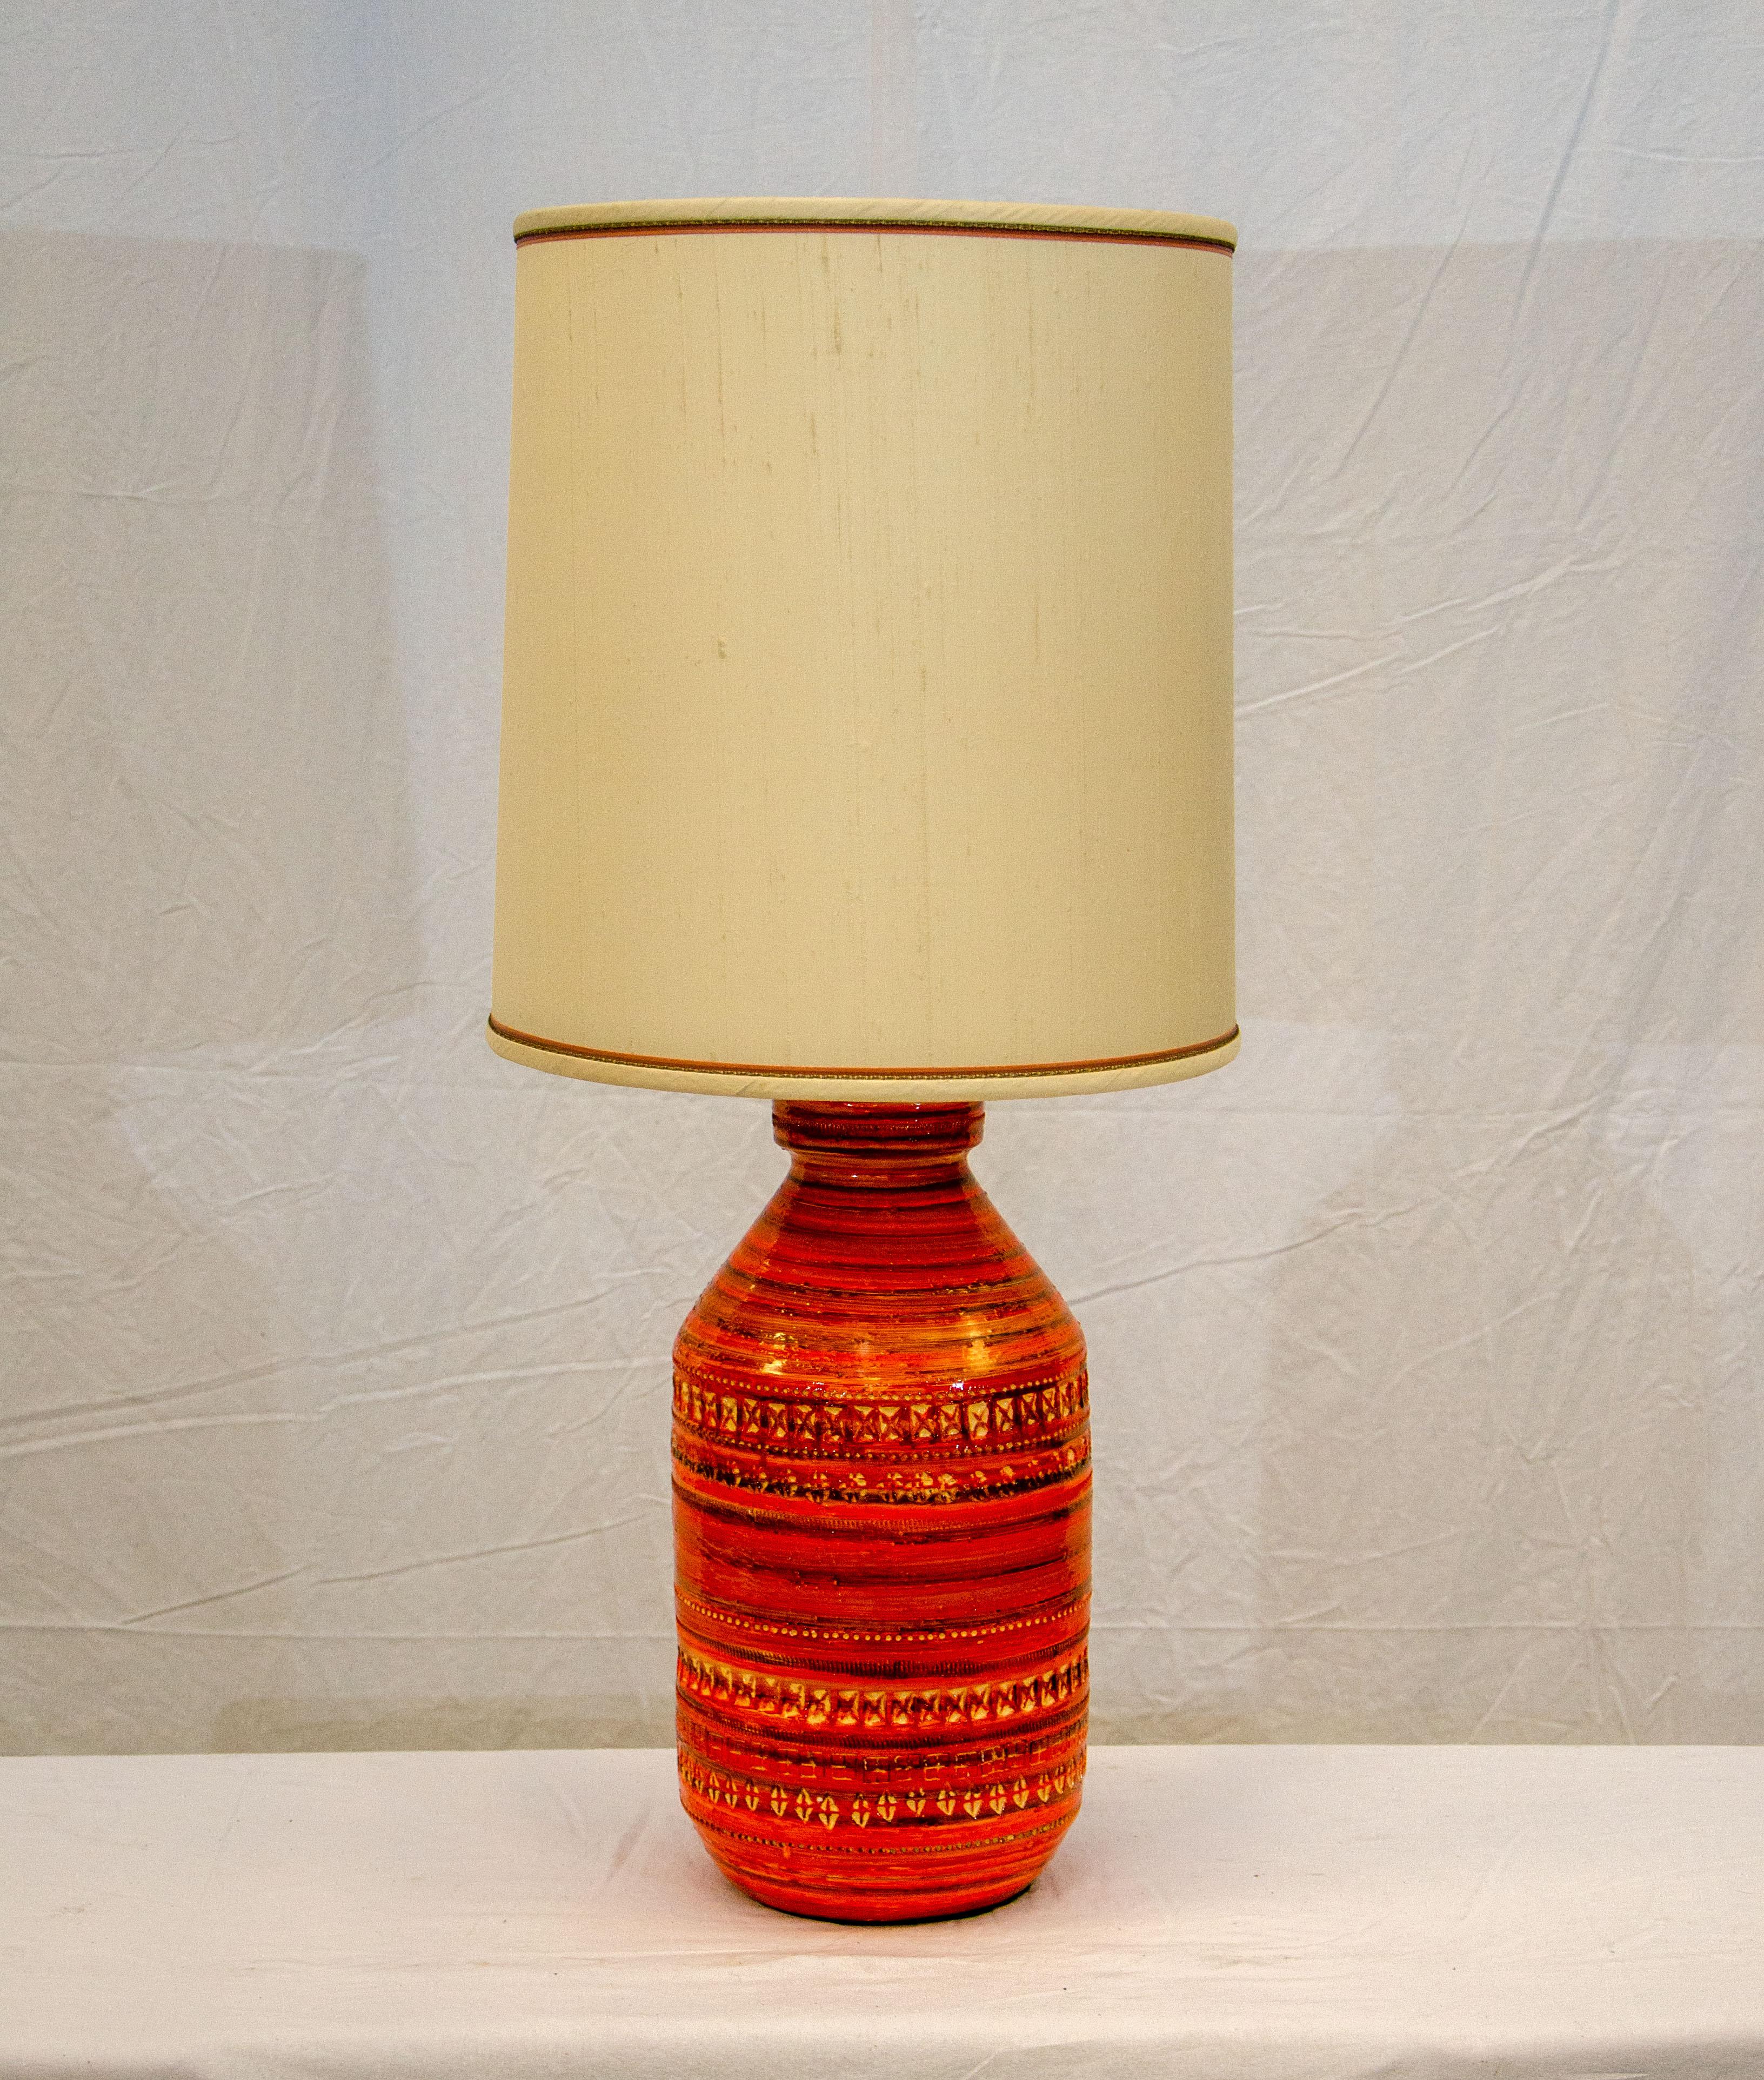 This striking ceramic orange table lamp with an original shade retains the orange & brown small ribbon piping around the top and bottom. The textured shade is 16 1/2